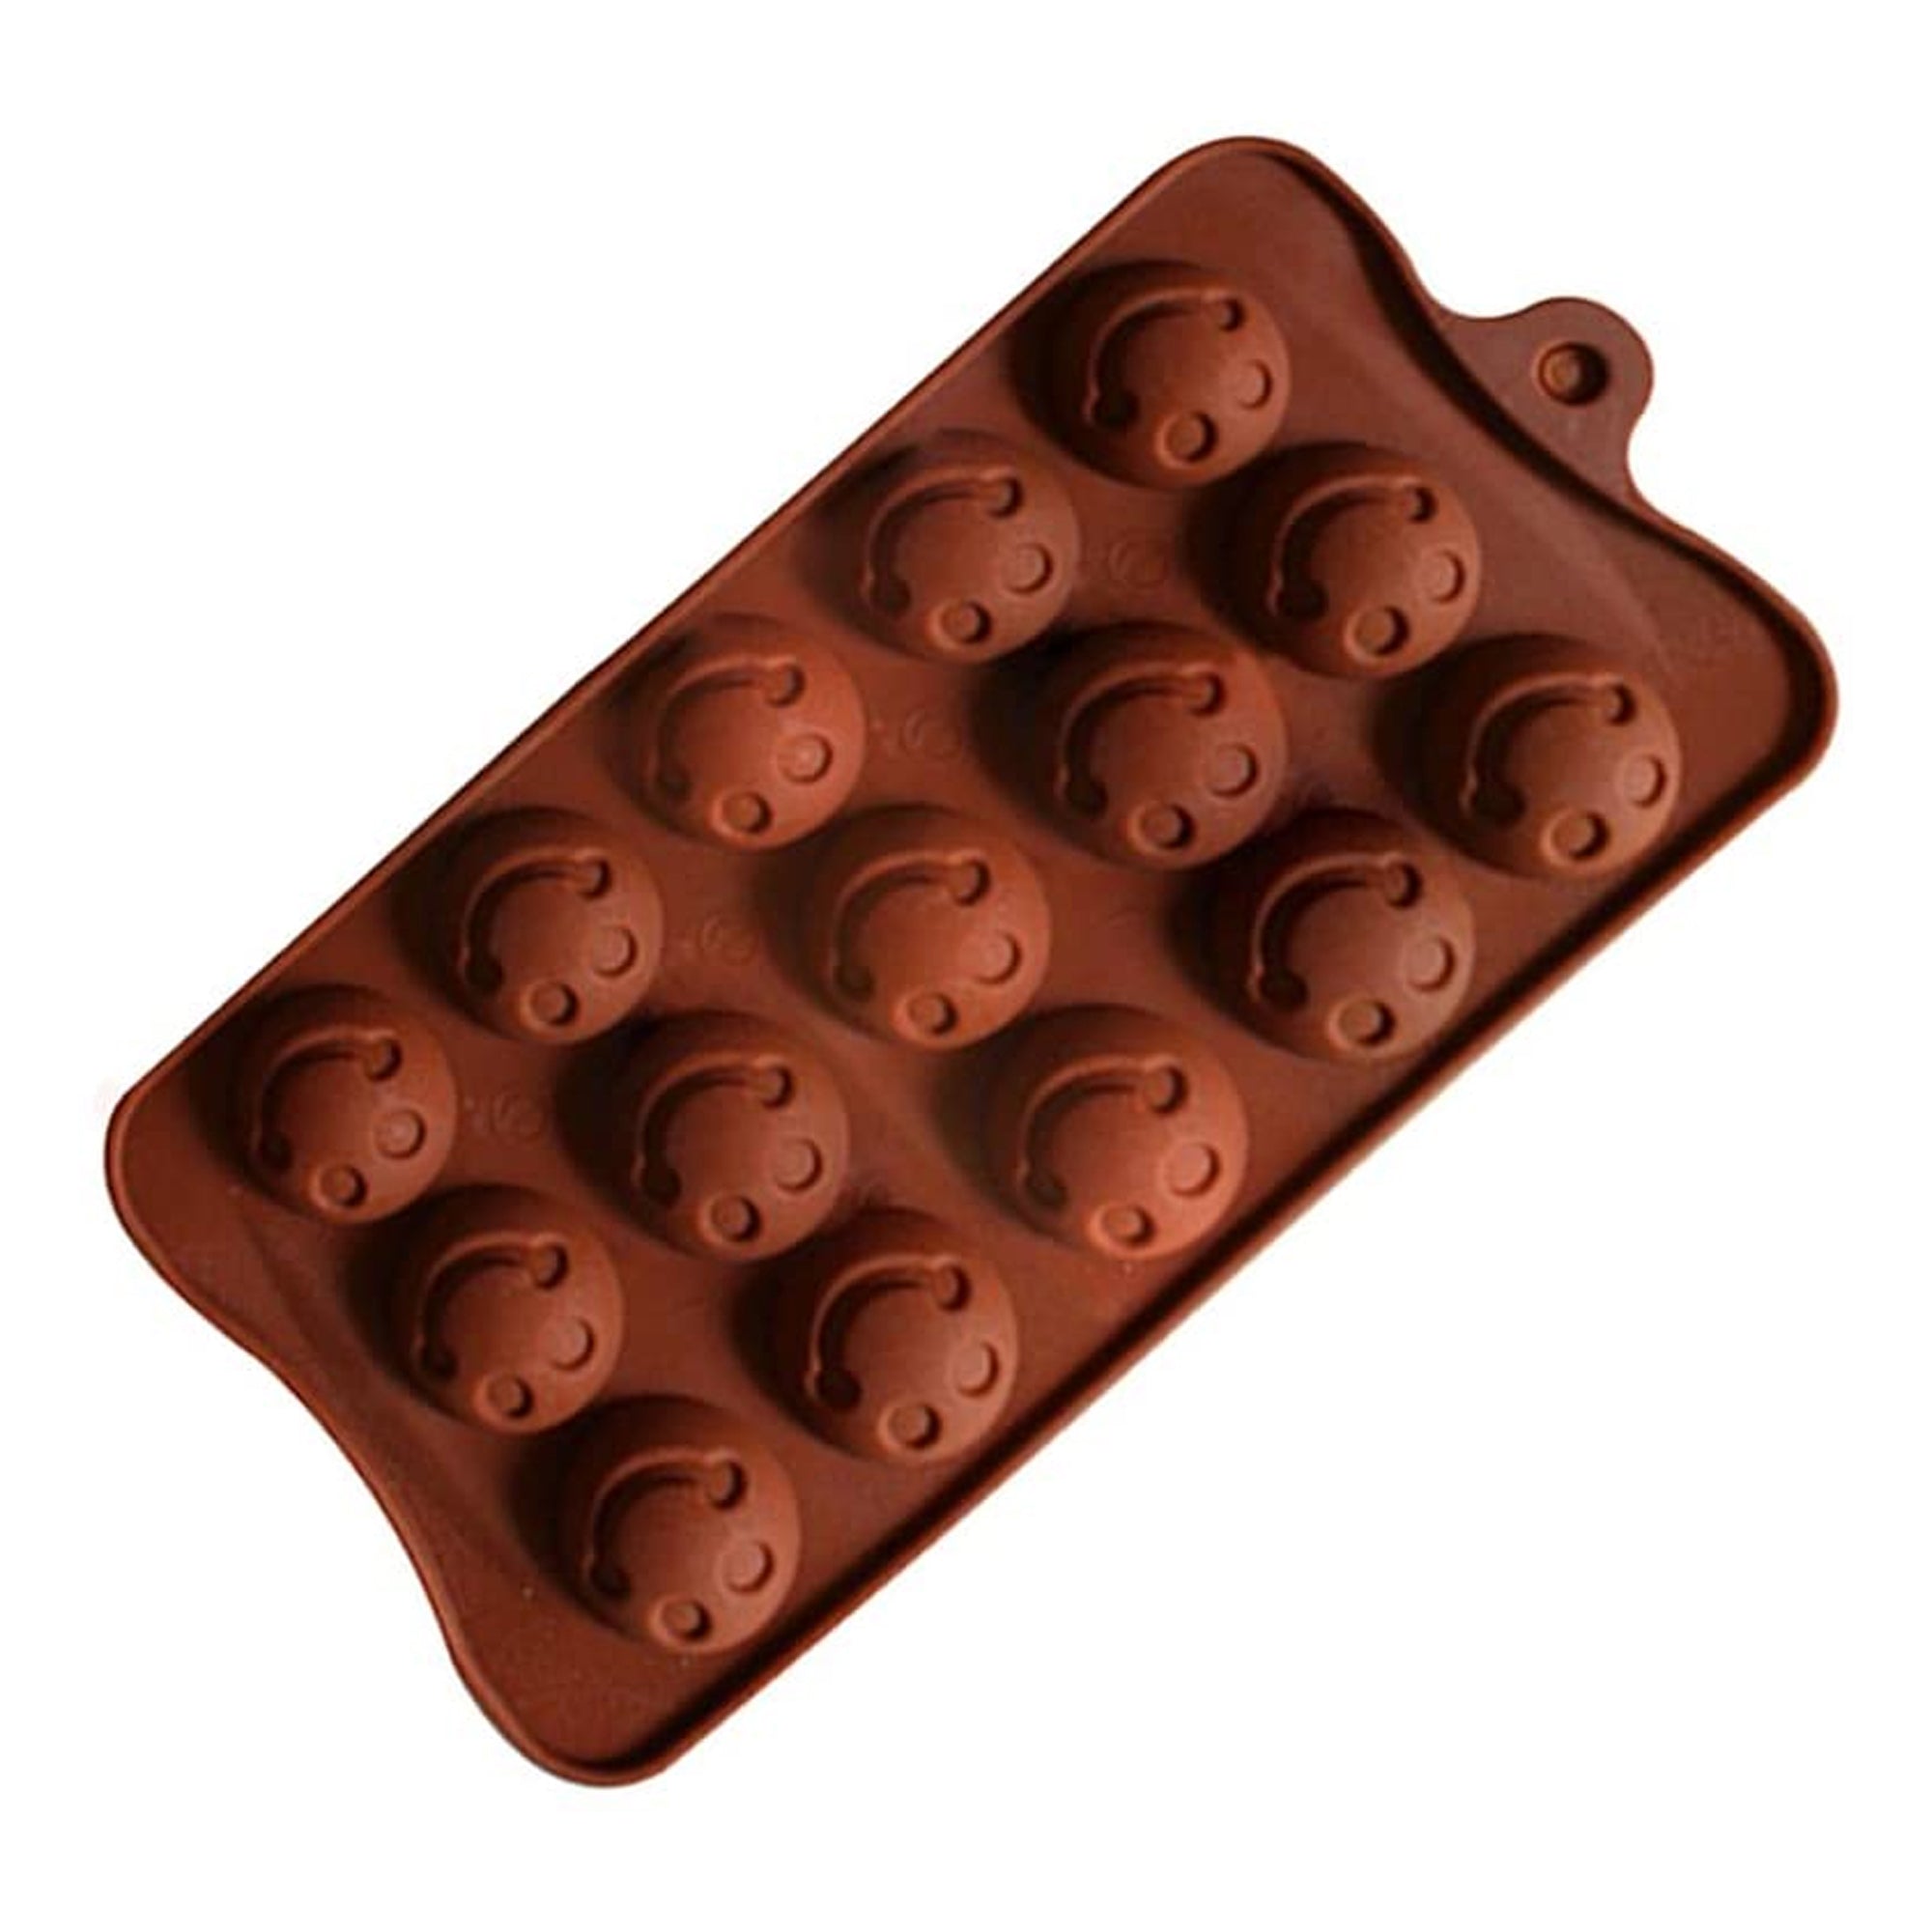 1188 Food Grade Non-Stick Reusable Silicone Smile Shape 15 Cavity Chocolate Molds / Baking Trays 